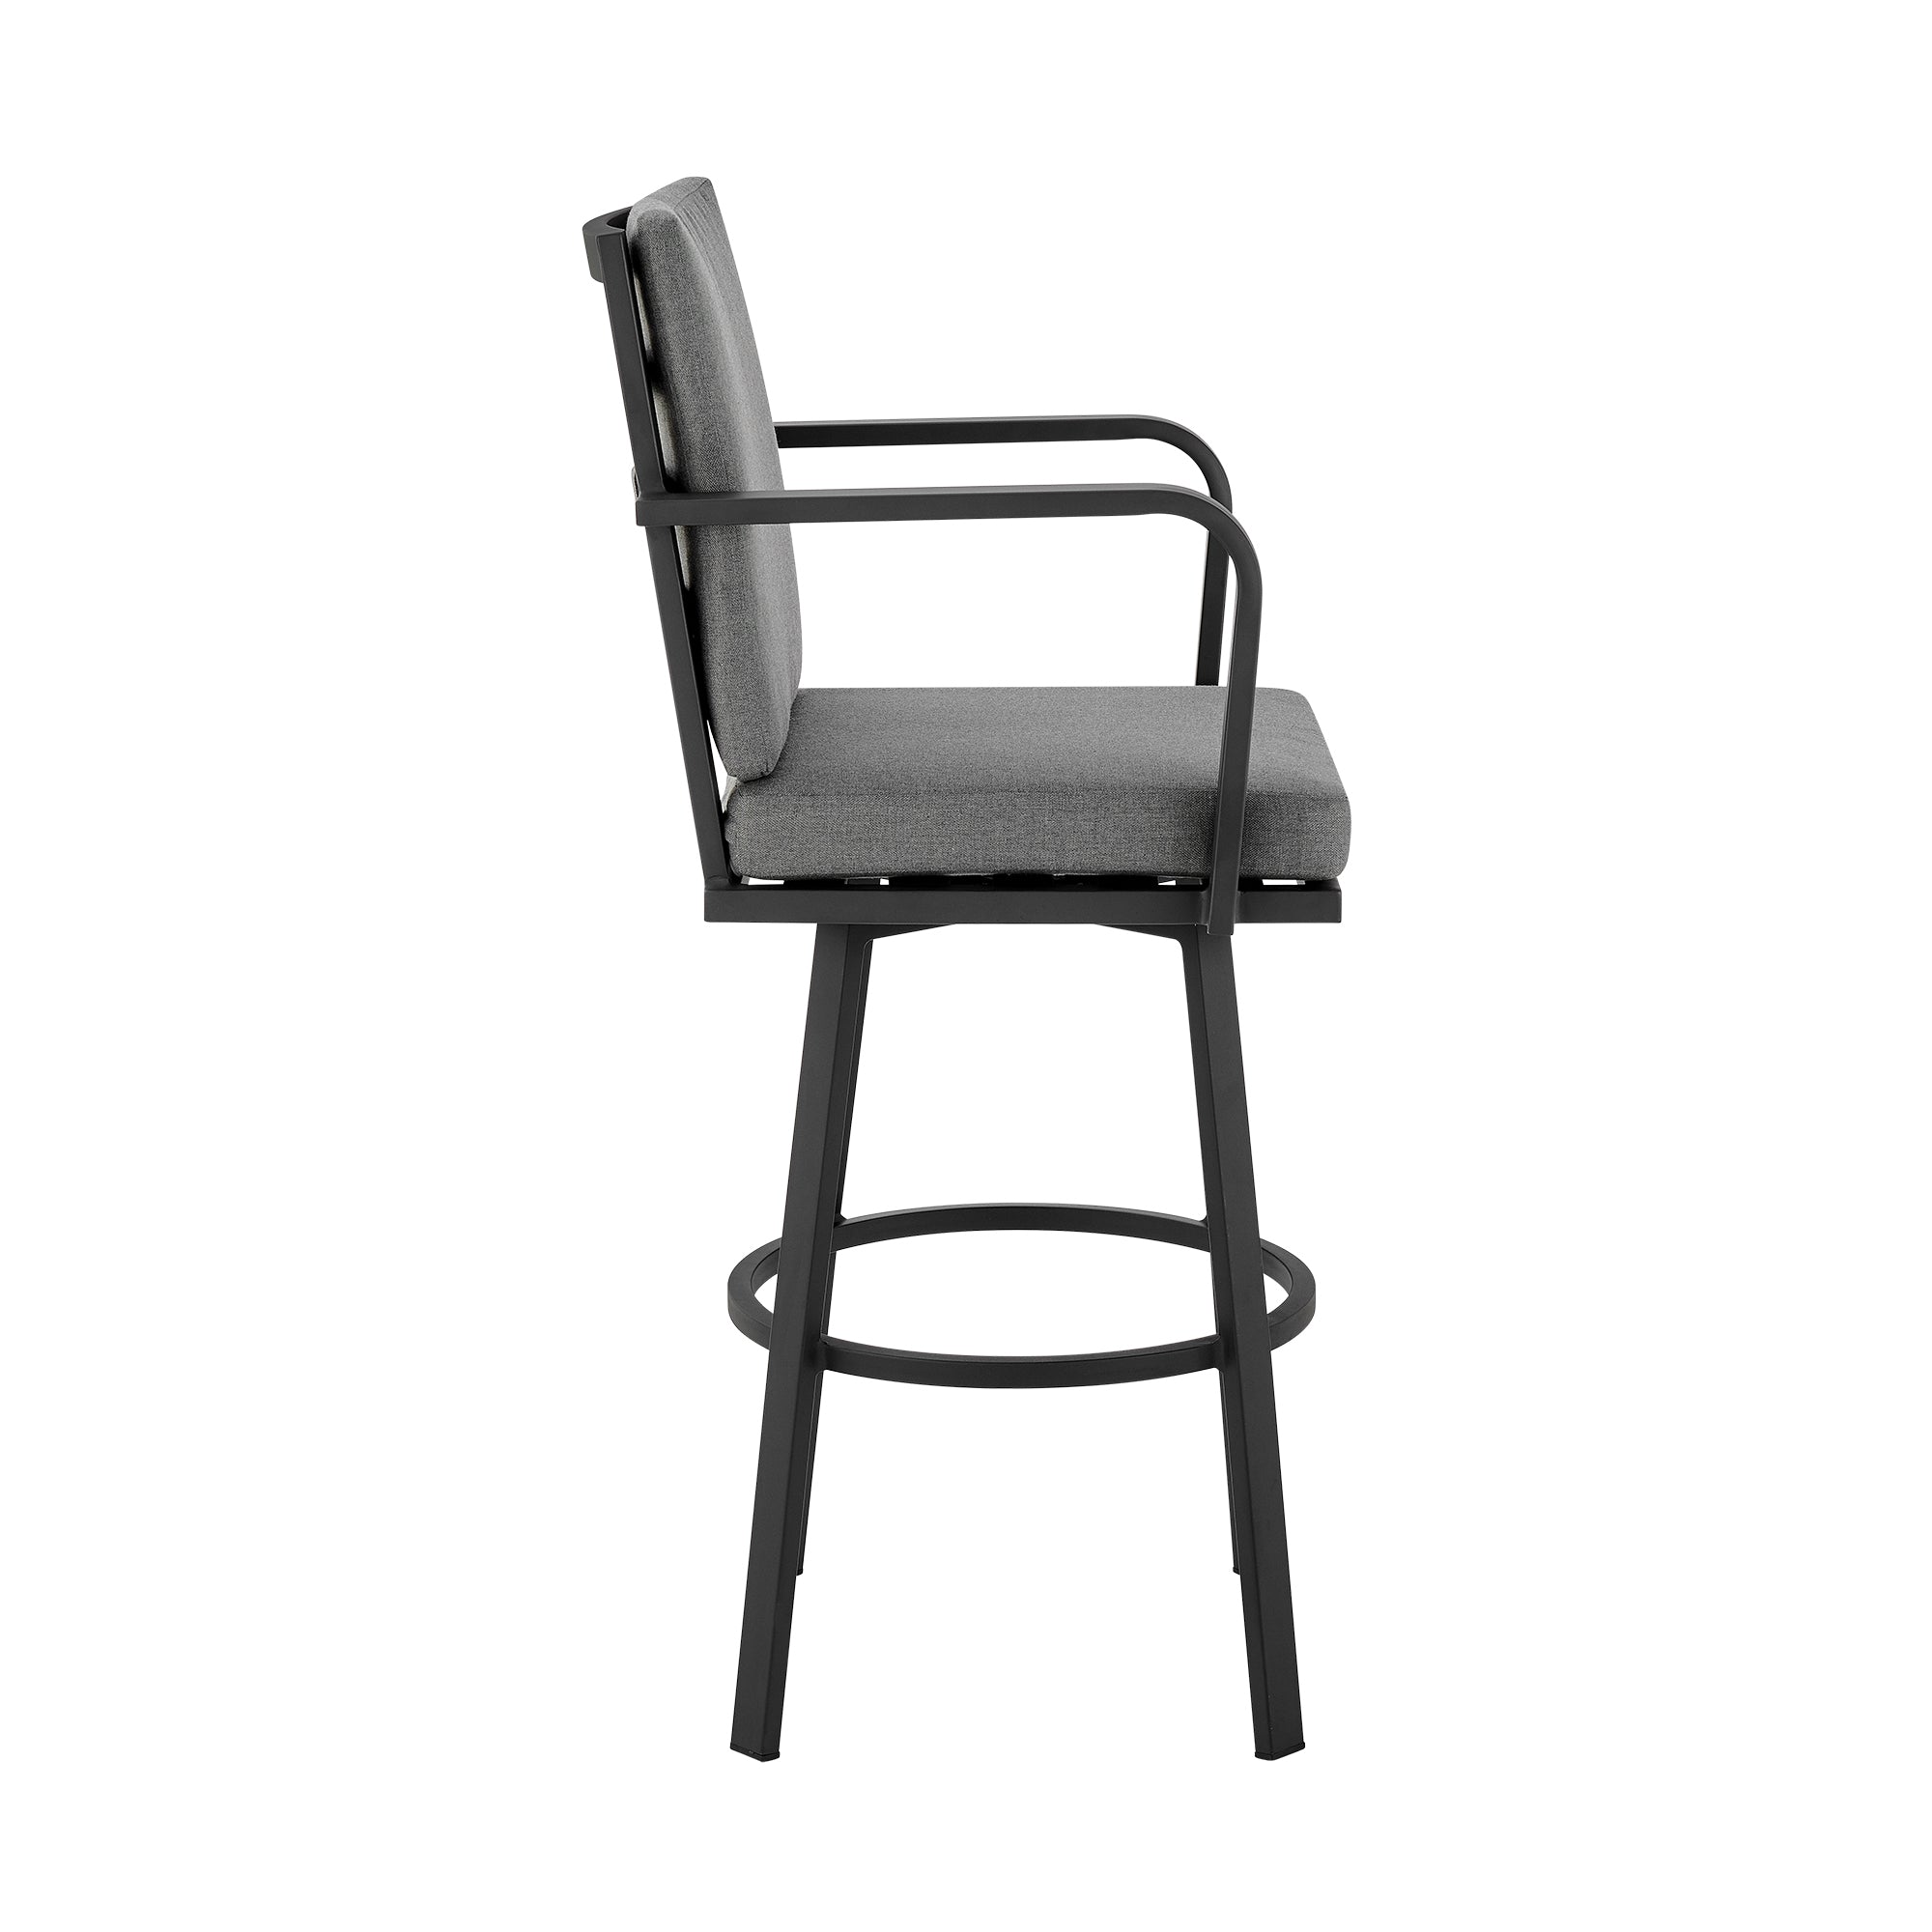 Armen Living - Don Outdoor Patio Bar or Counter Stool in Aluminum with Cushions - 840254332485